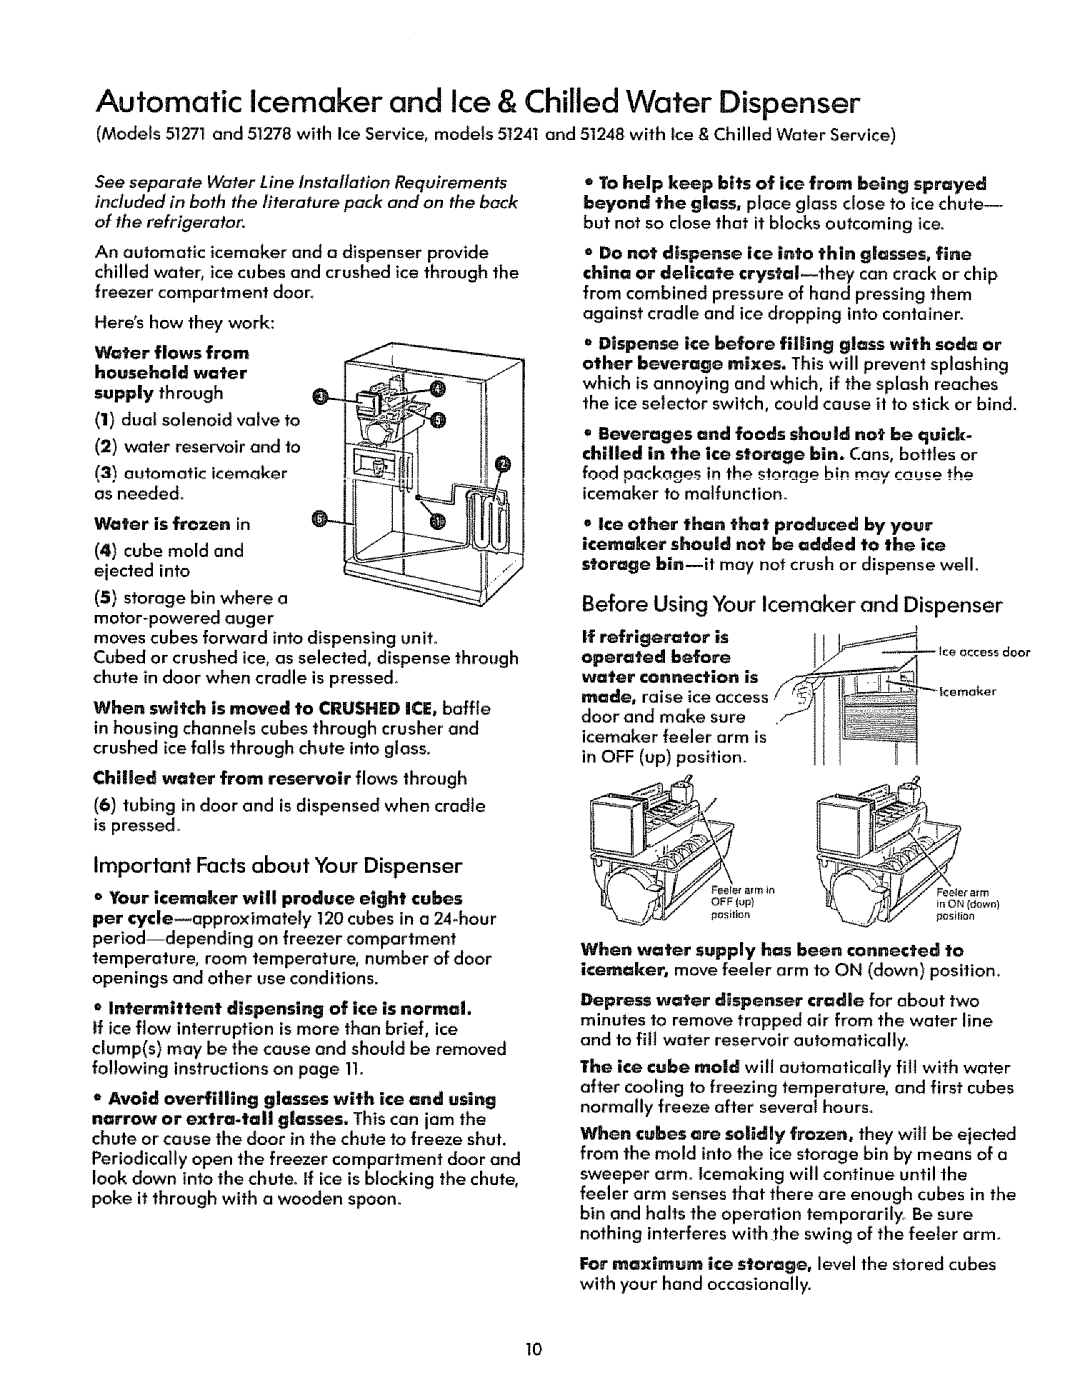 Sears 51278 Before Using Your Icemaker and Dispenser, Important Facts about Your Dispenser, 3automatic icemaker as needed 